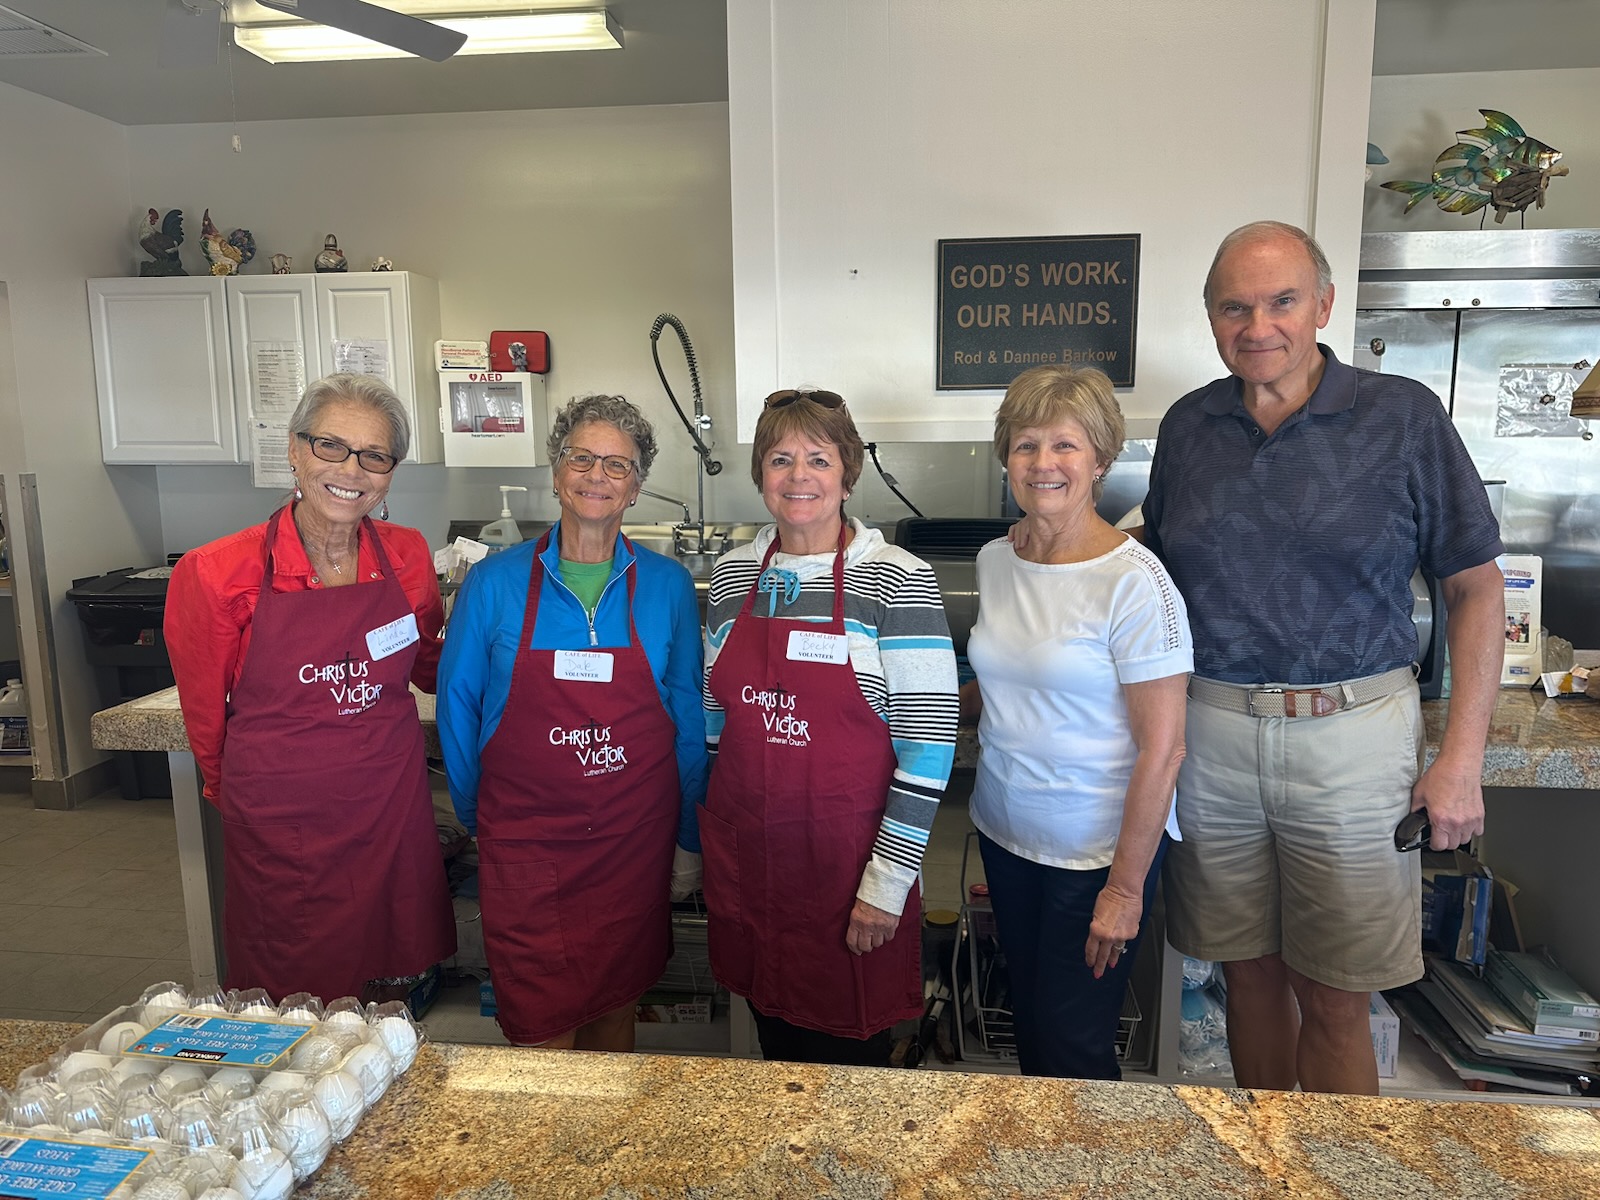 cafe of life christus victor members prepare meals feed hungry